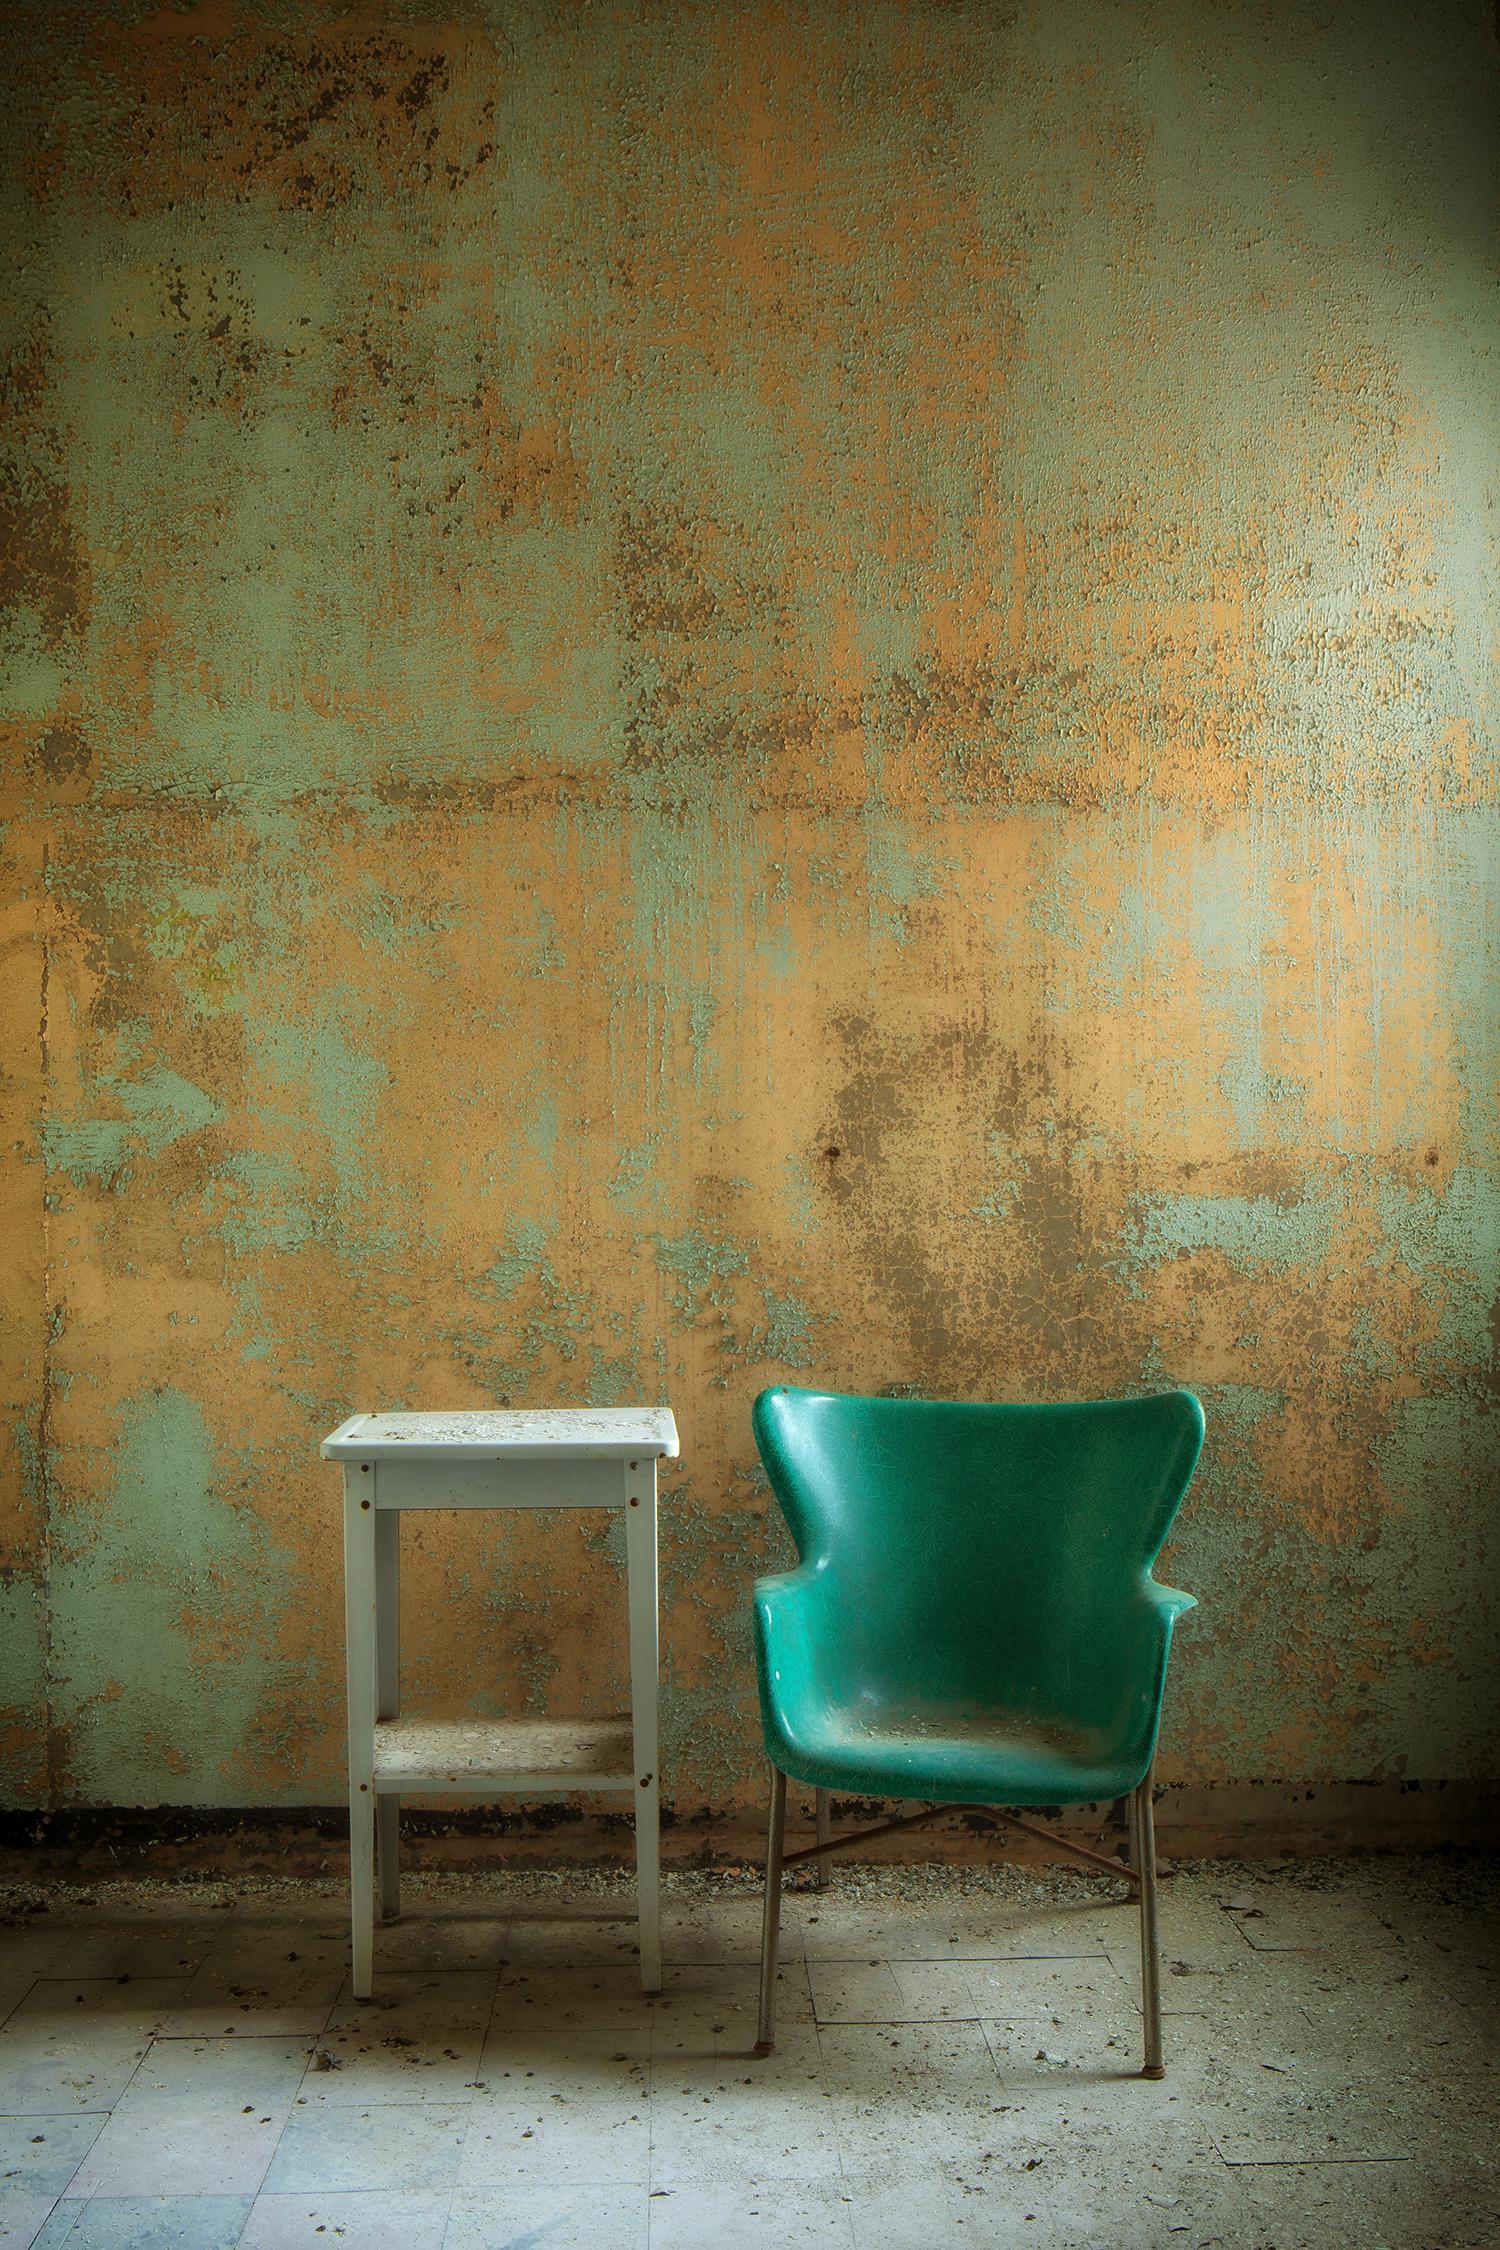 "Left", contemporary, abandoned hospital, chair, blue, green, color photograph